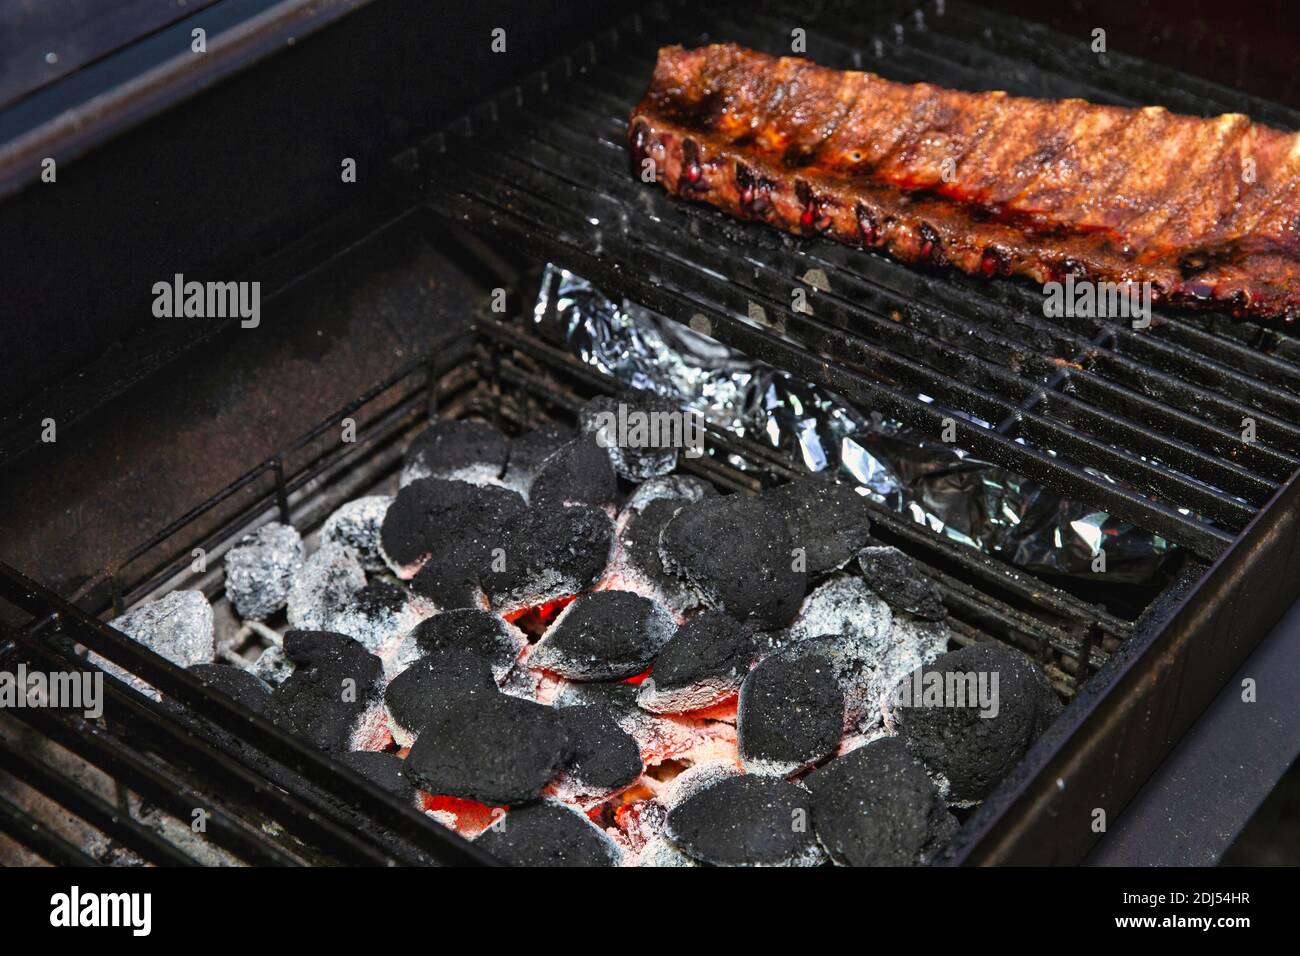 Hobby Grill High Resolution Stock Photography and Images - Alamy